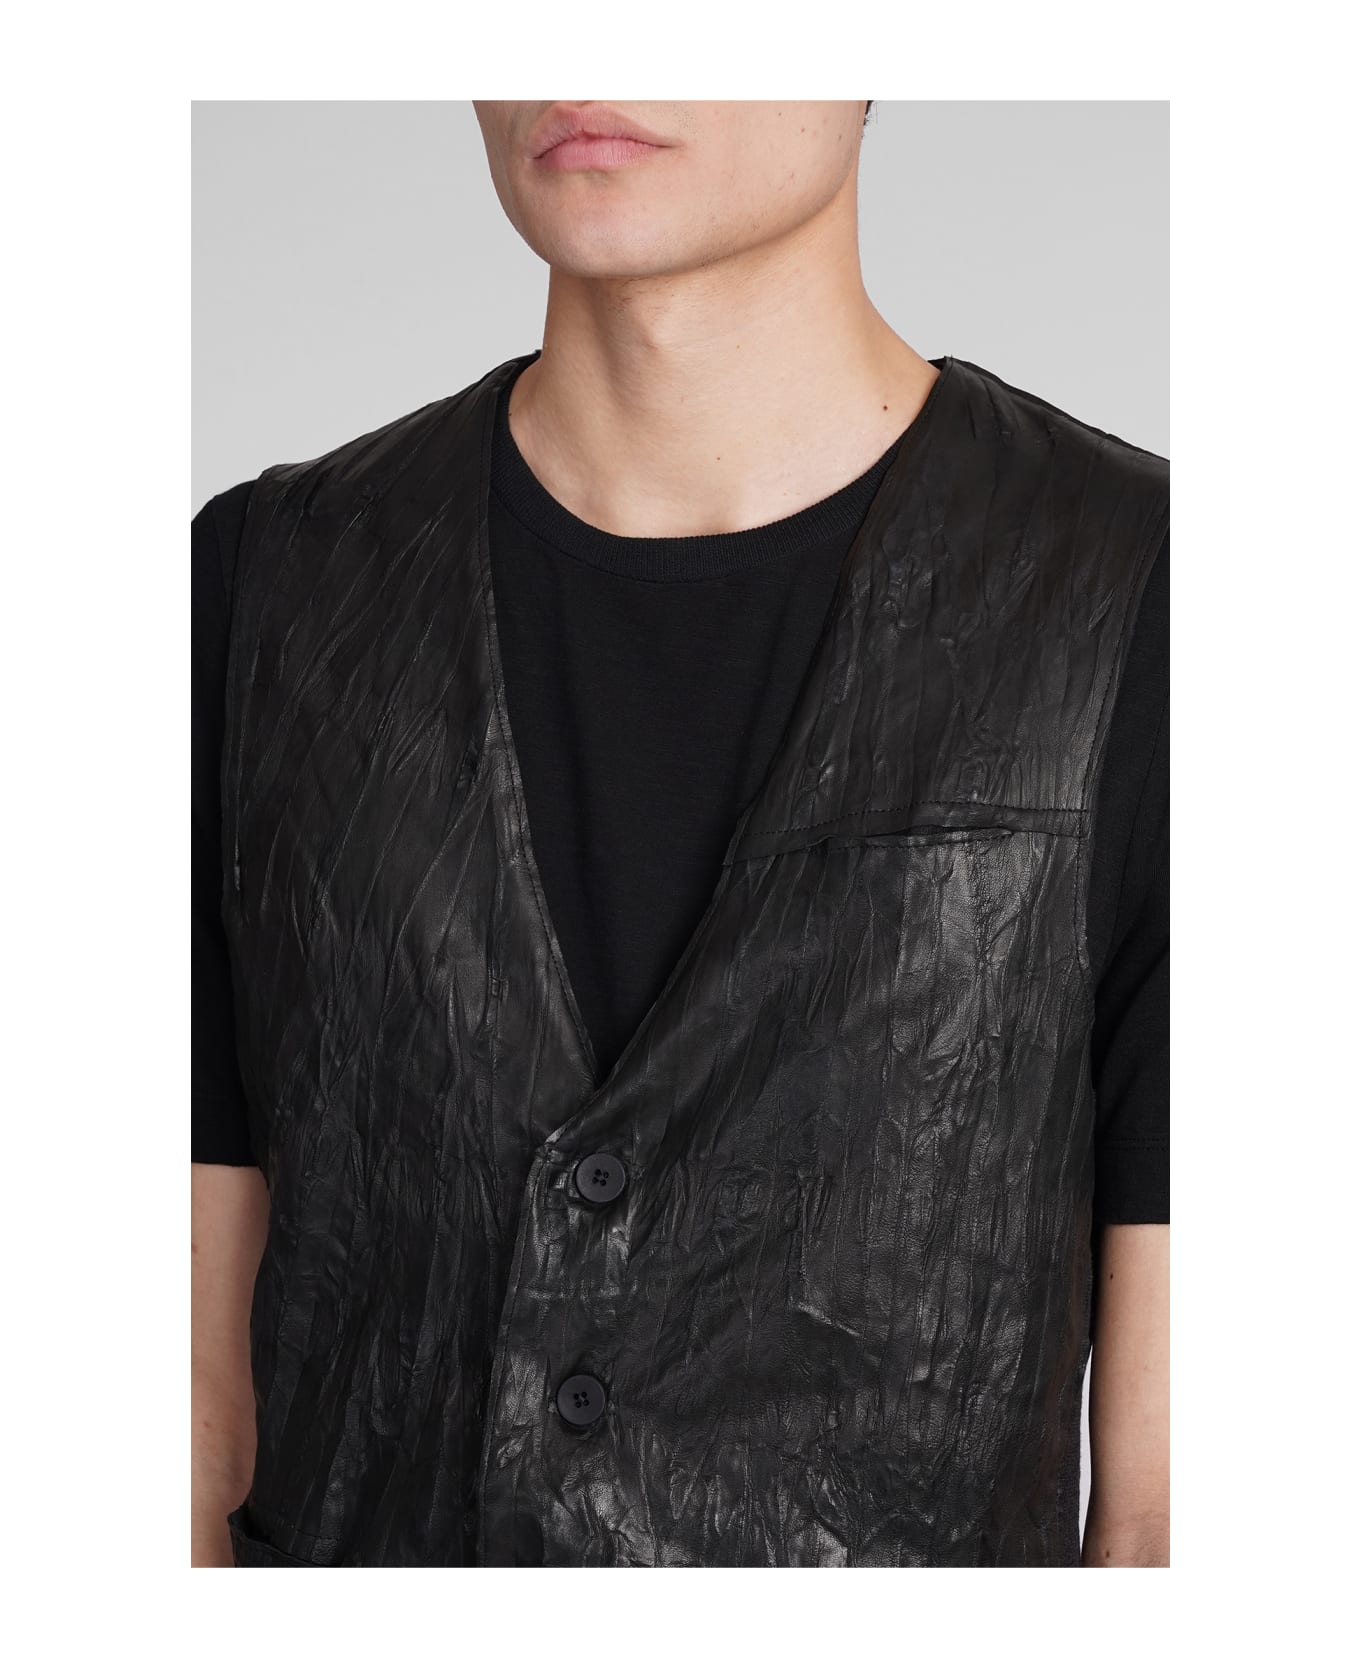 Transit Vest In Black Leather And Fabric - black